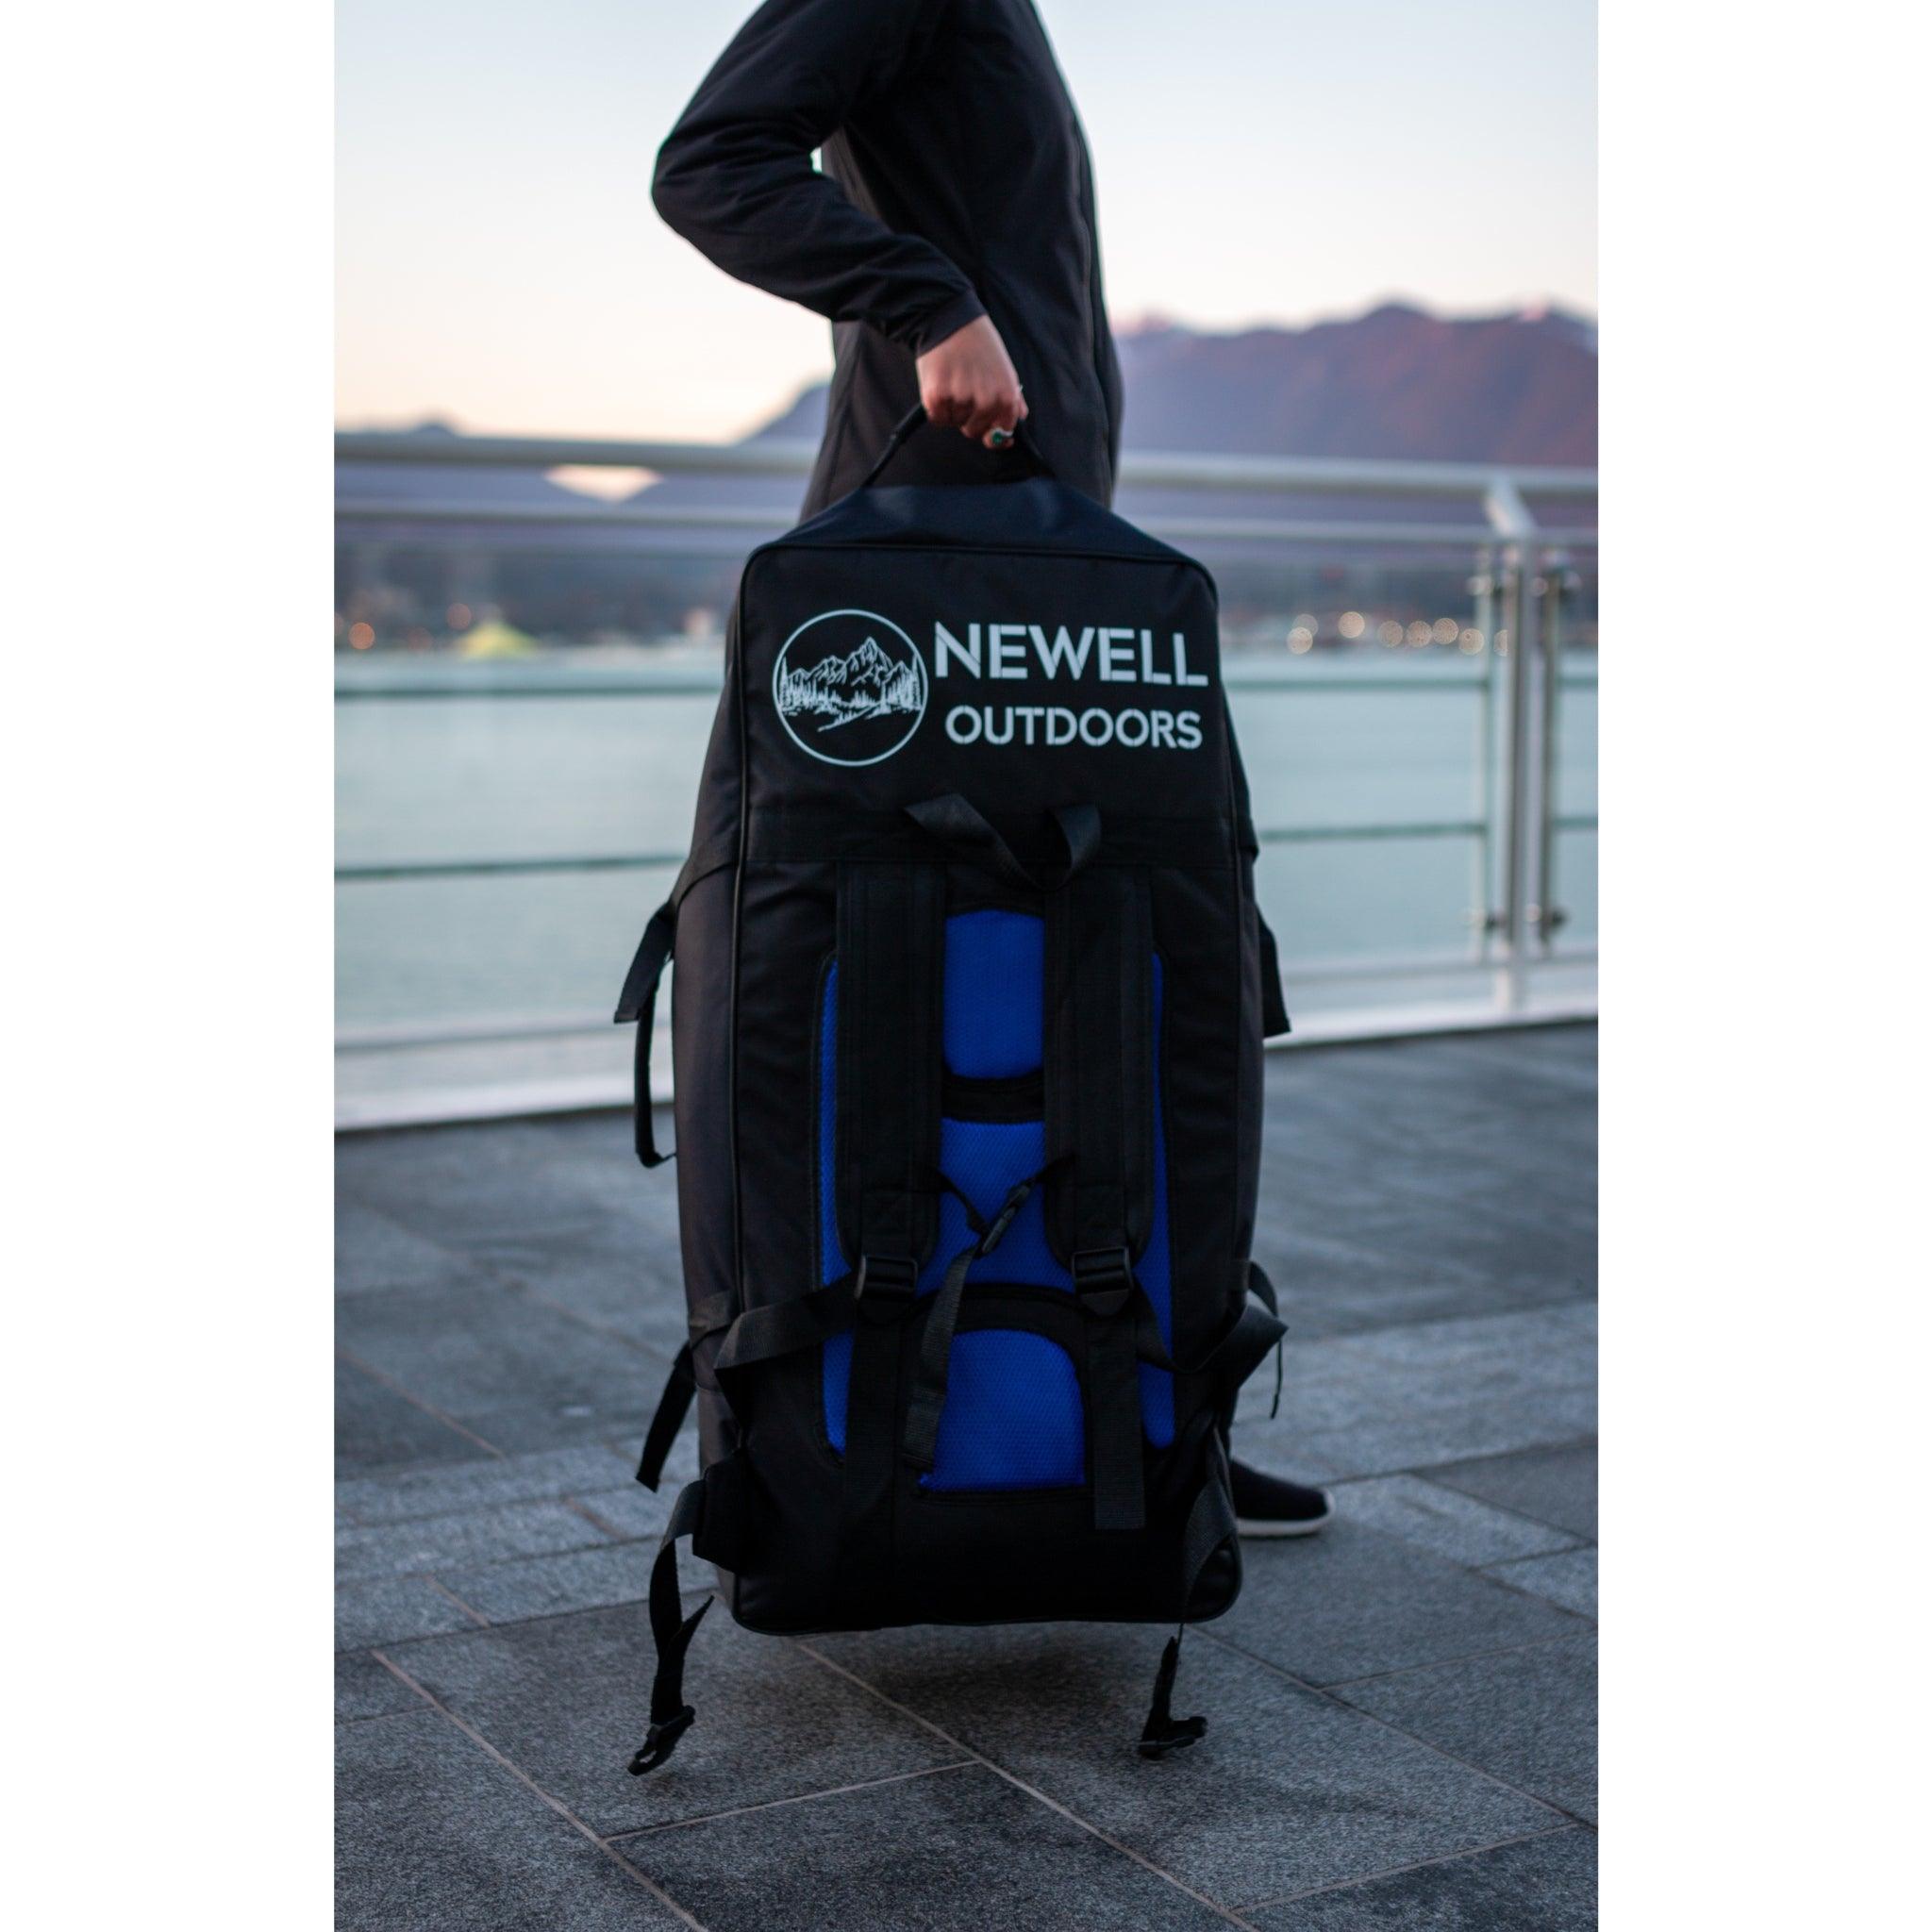 The Offspring paddleboard bag by Newell Outdoors.